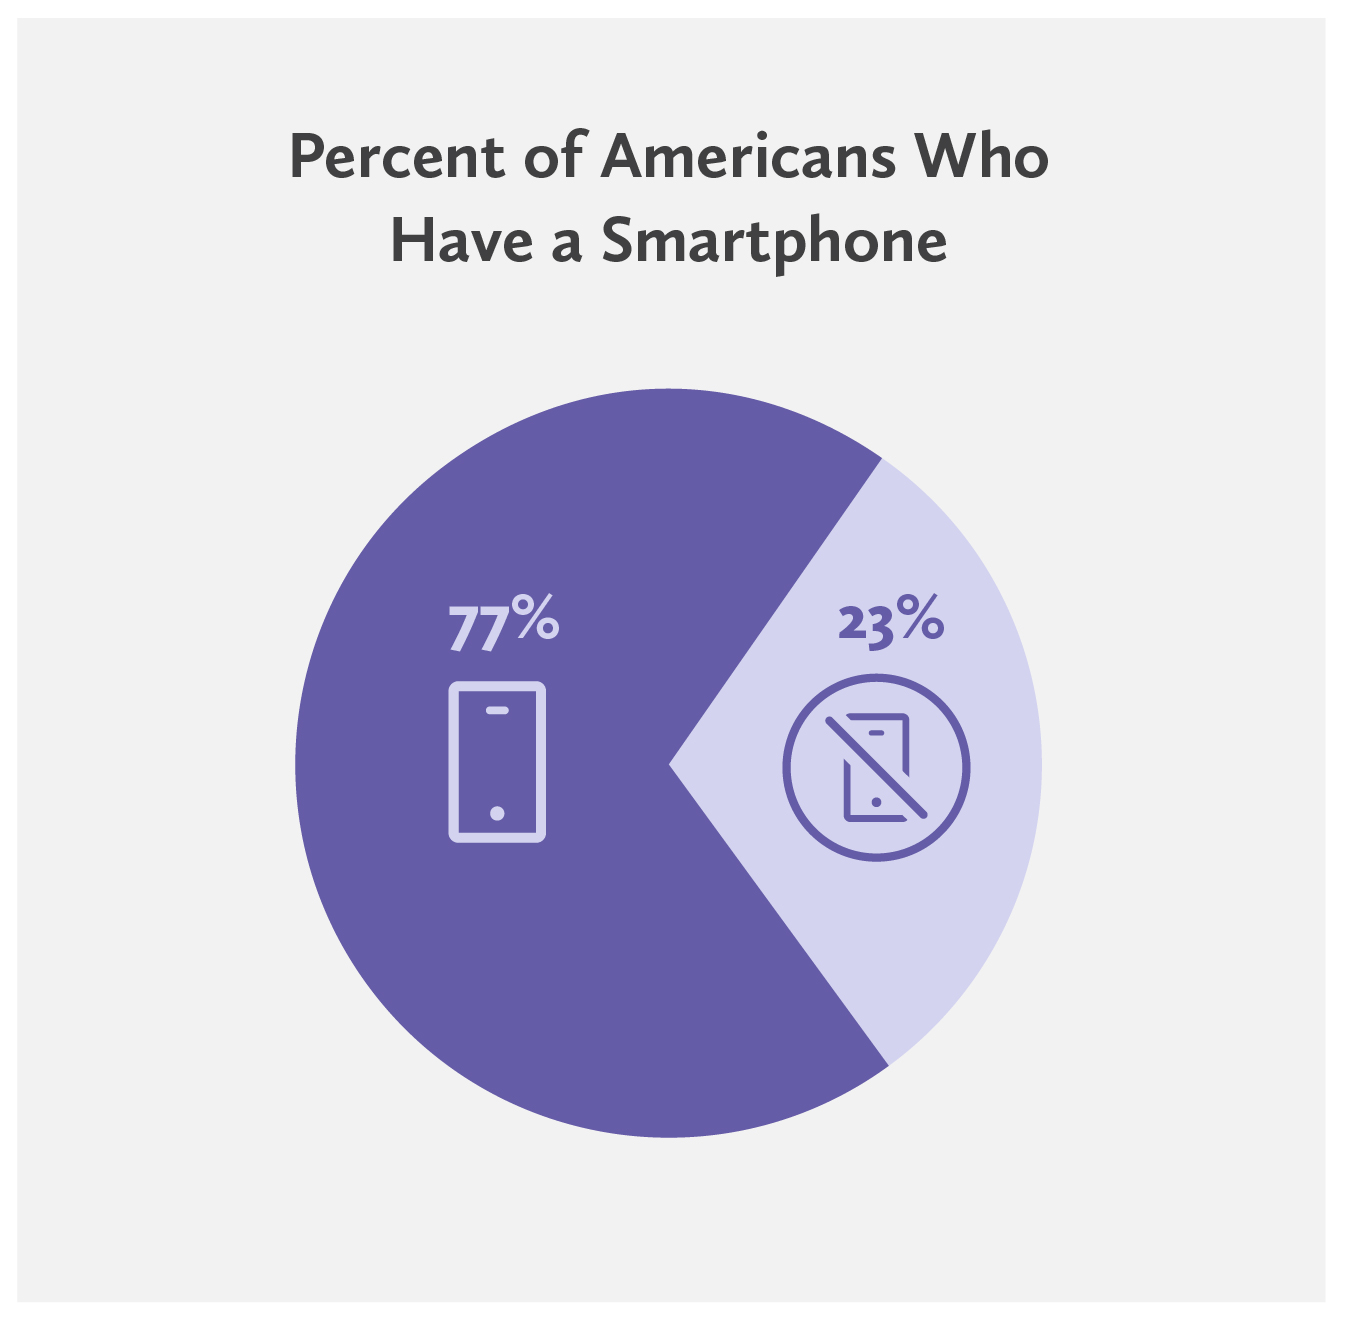 pie chart - what percent of Americans have a smartphone?